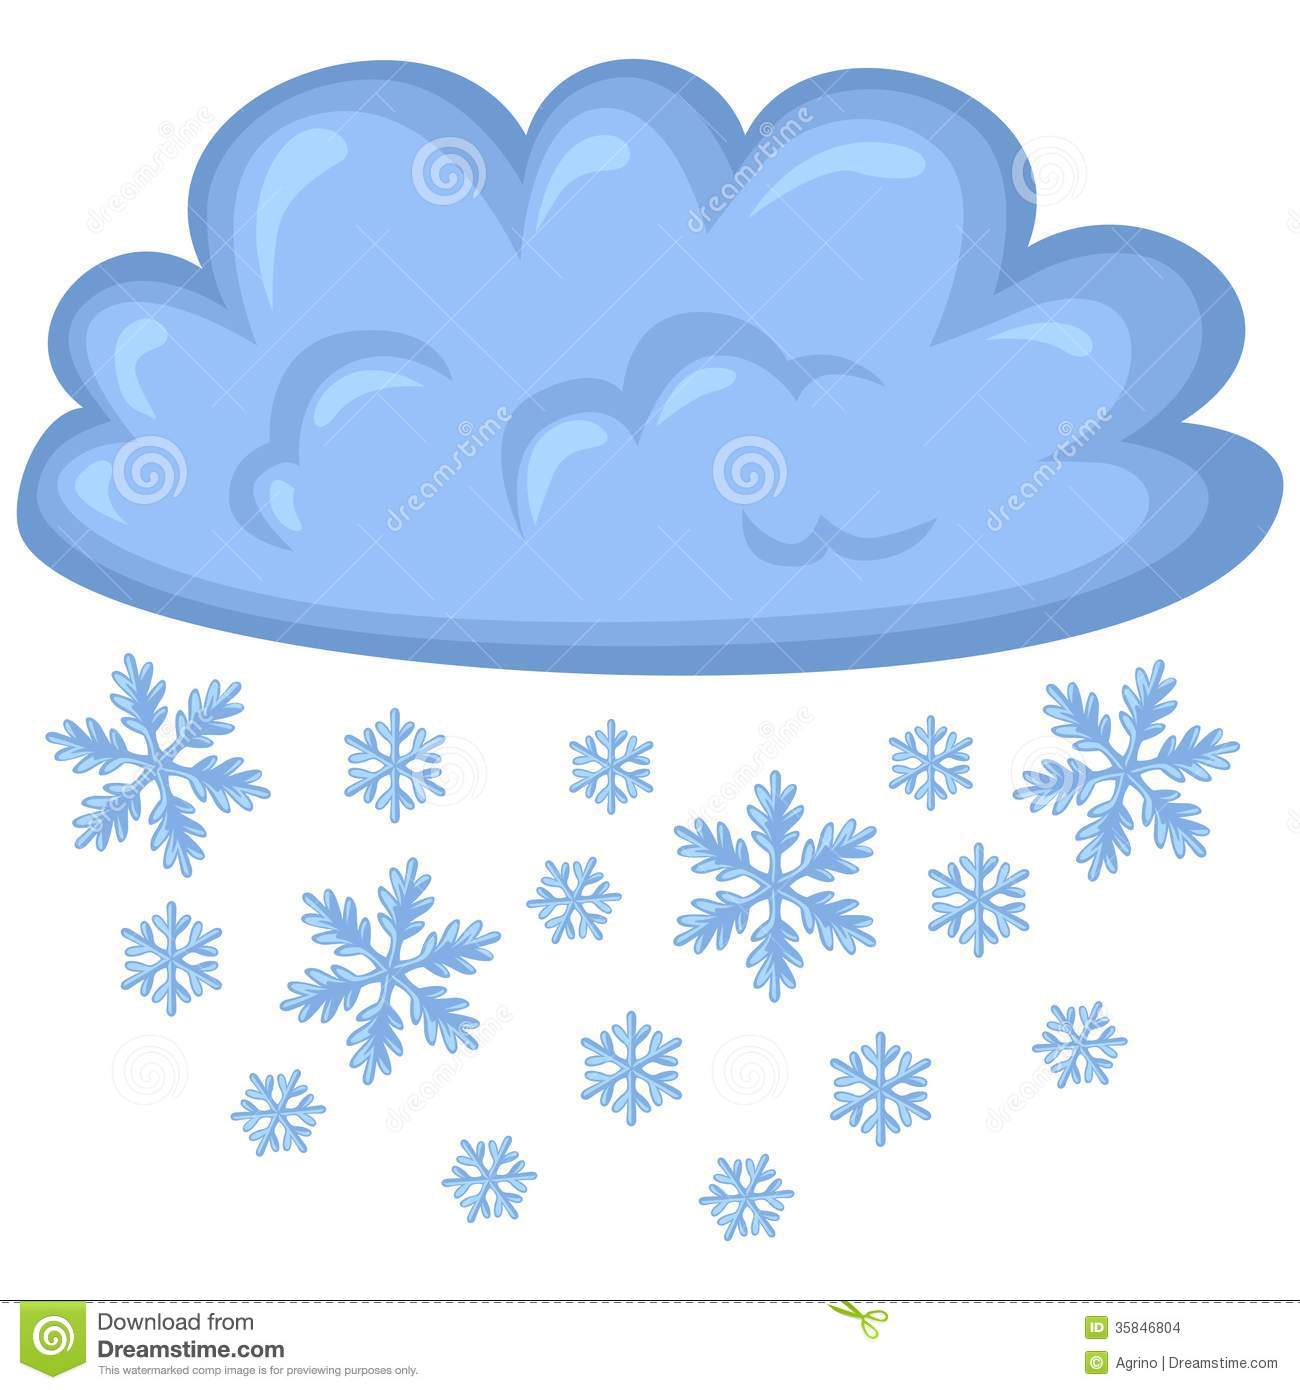 Free Snow Clipart. Displaying 17u0026gt; Images For .